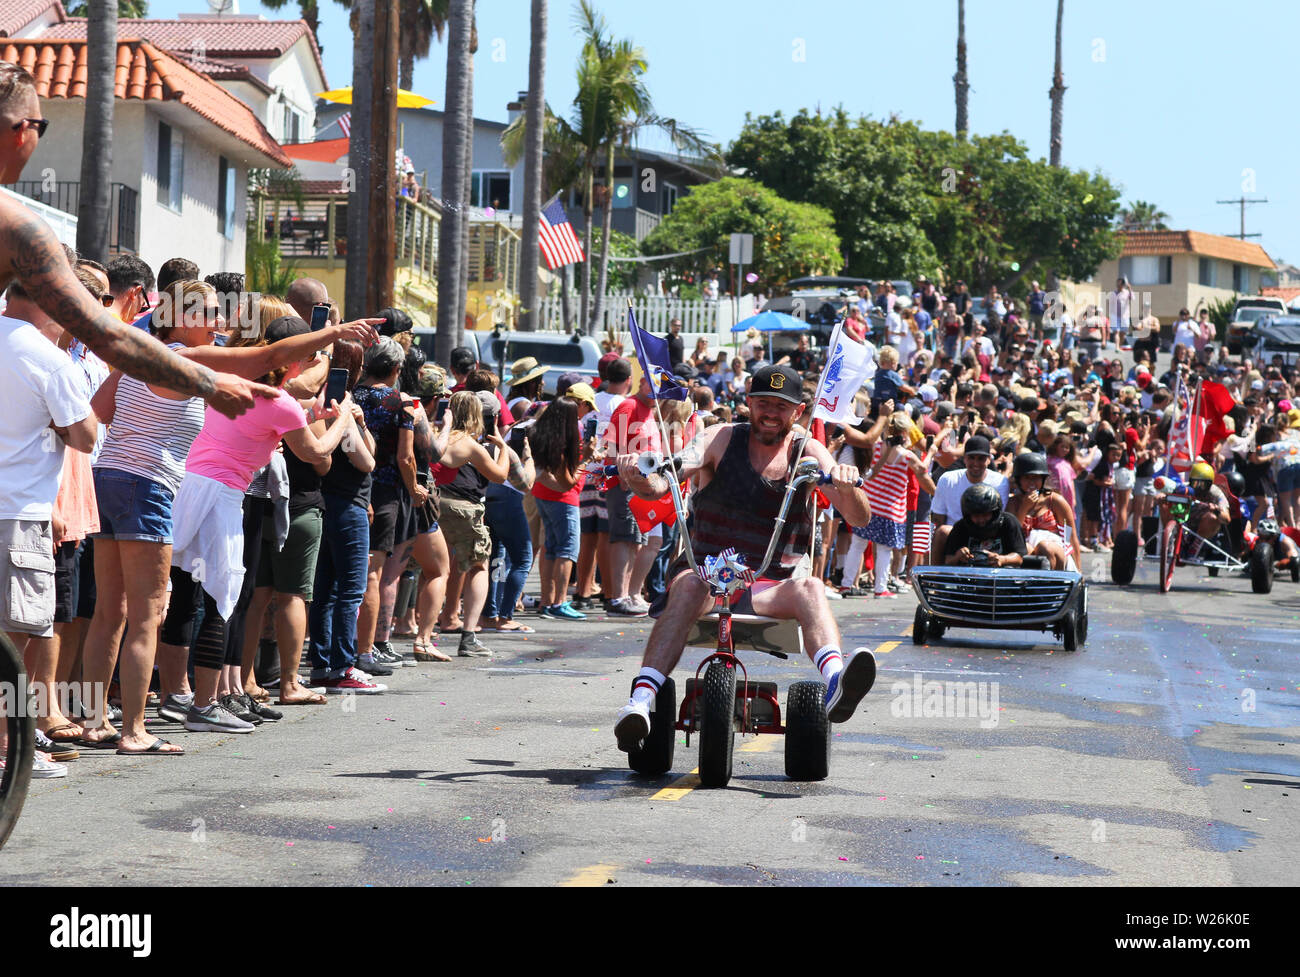 Jul 4, 2019 - San Clemente, California, U.S. - The San Clemente Fourth of July Office Chair Downhill Derby is part soapbox racing, part spring break-style party, where dozens of brave racers modify office chairs, put on costumes and hurl themselves down hill. People attach bicycle handlebars, big rubber wheels, surfboards and whatever else they can find to the framework of a chair in hopes of reaching the bottom in one piece while maximizing speed. Every year there are still a few purists who barrel down the hill on the classic, standard office chair. It's also a water fight! (Credit Image: © Stock Photo